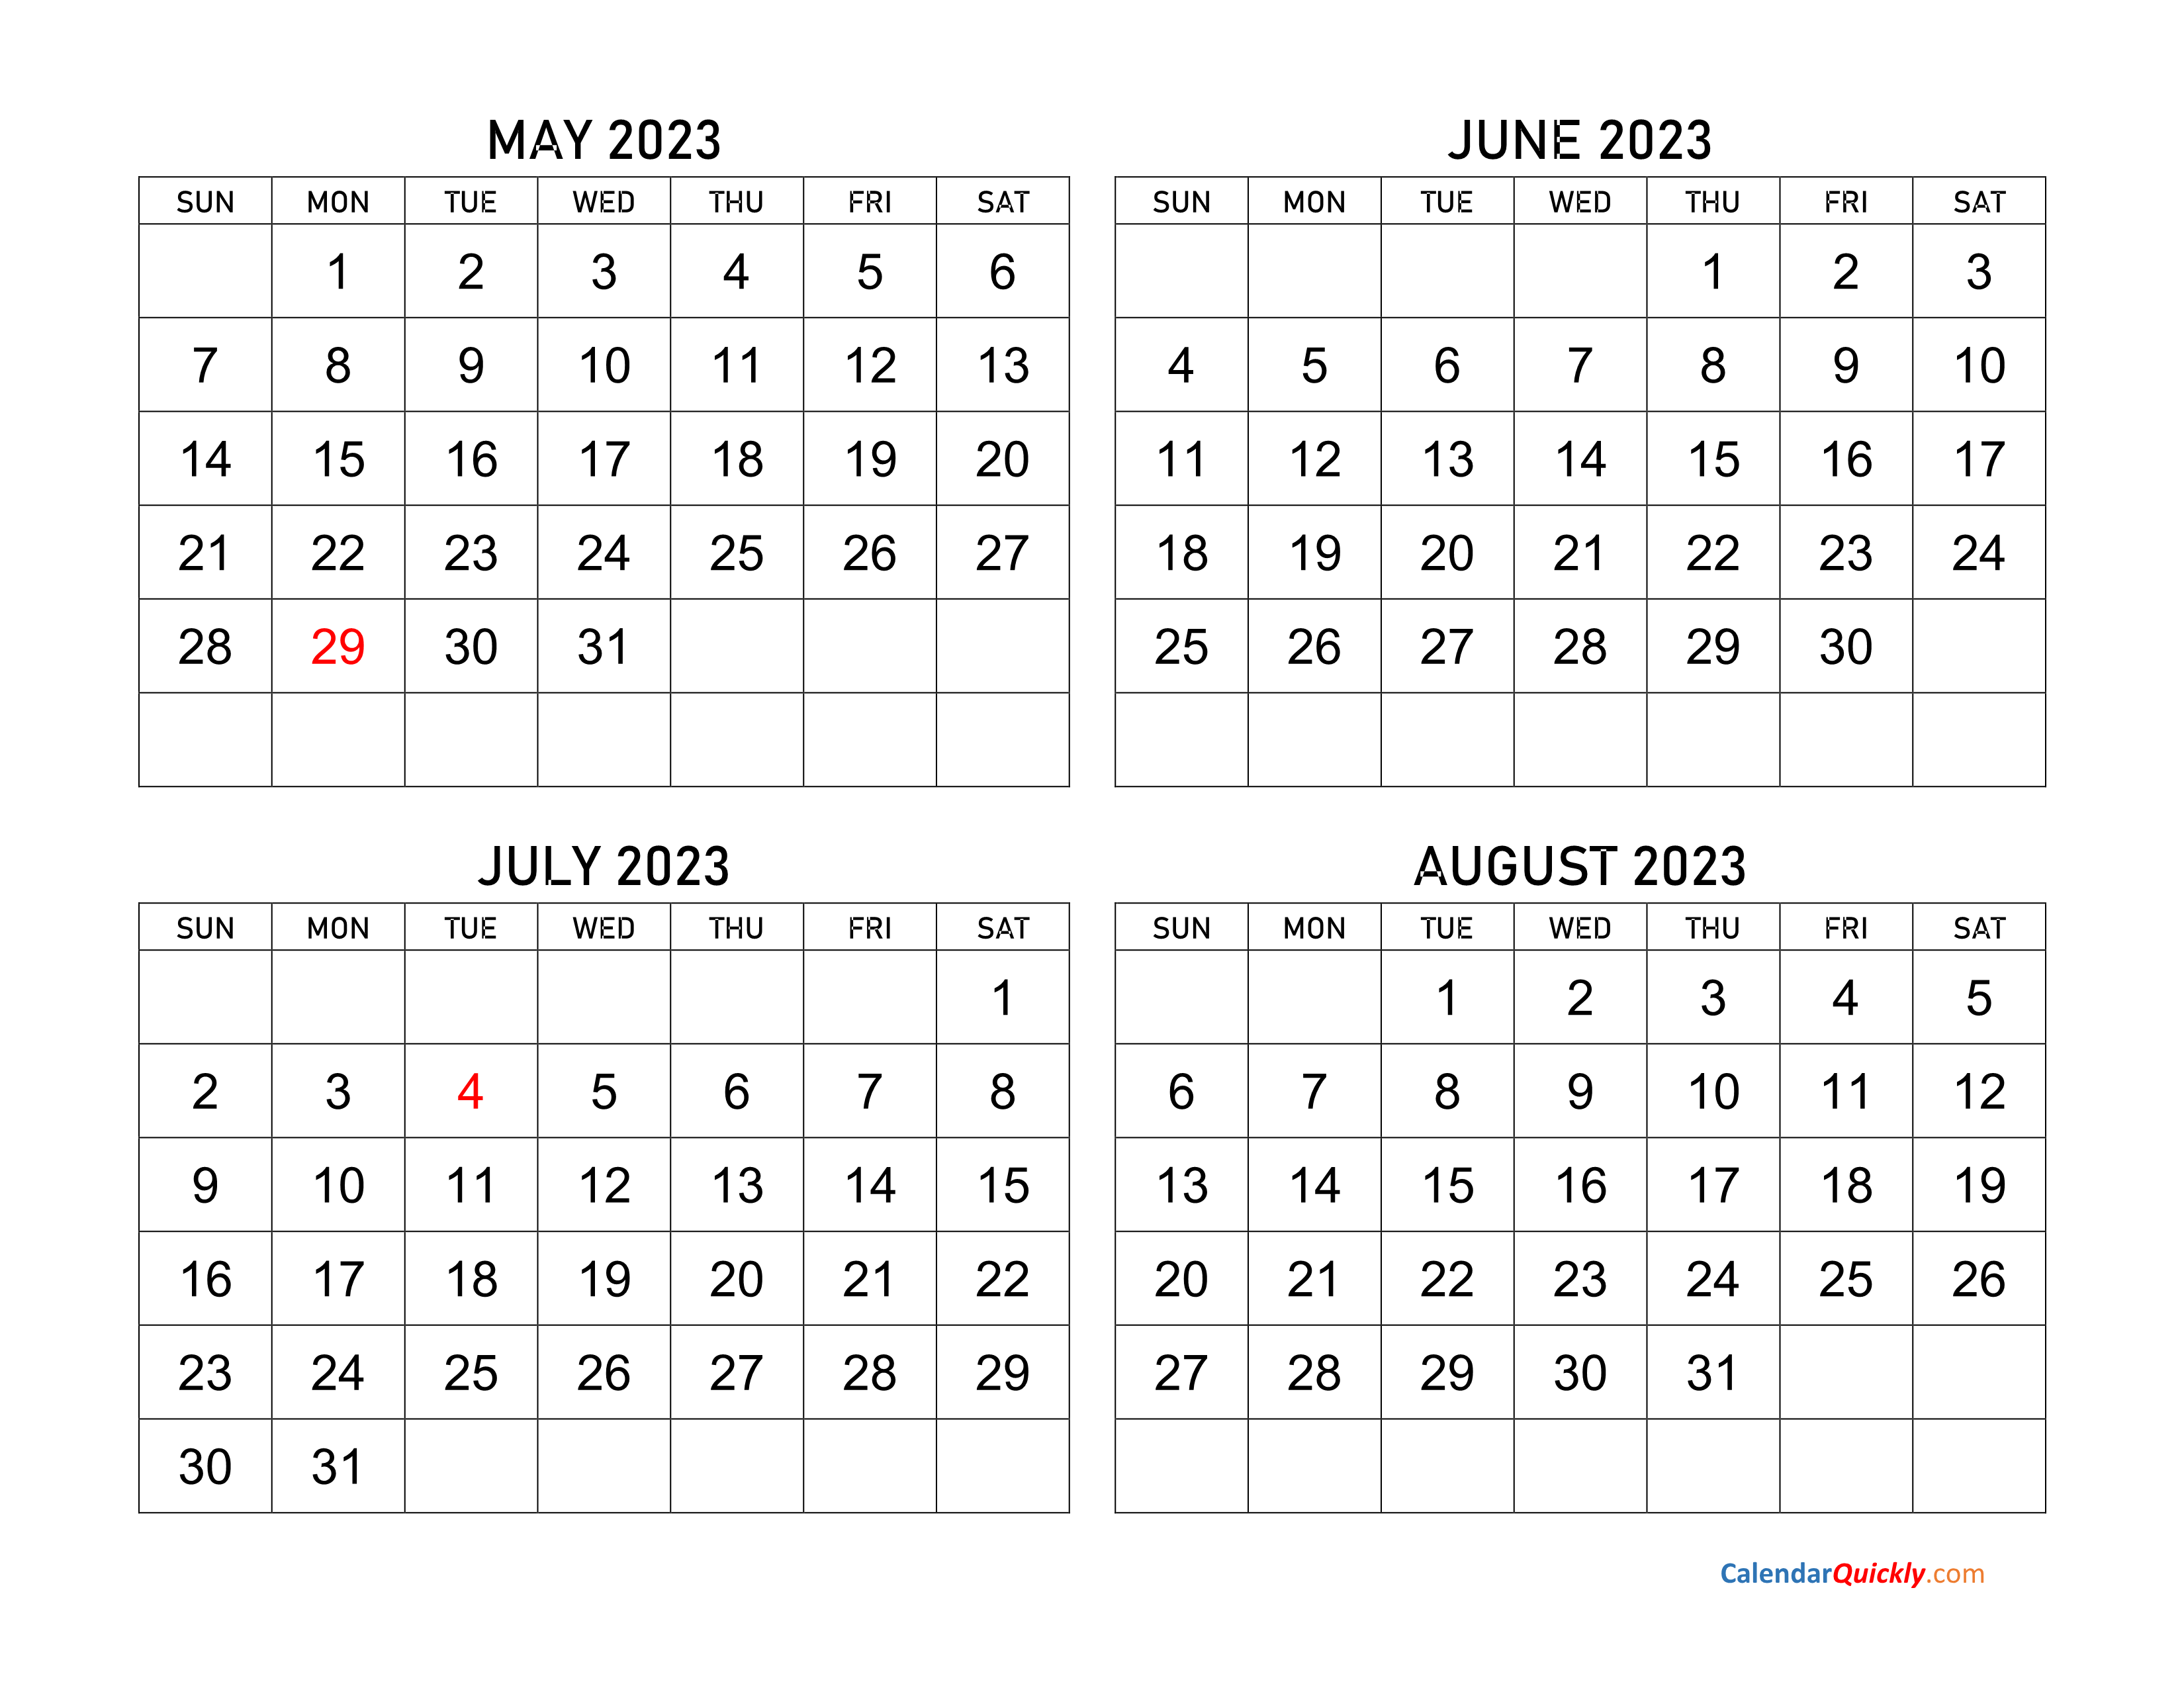 May to August 2023 Calendar Calendar Quickly